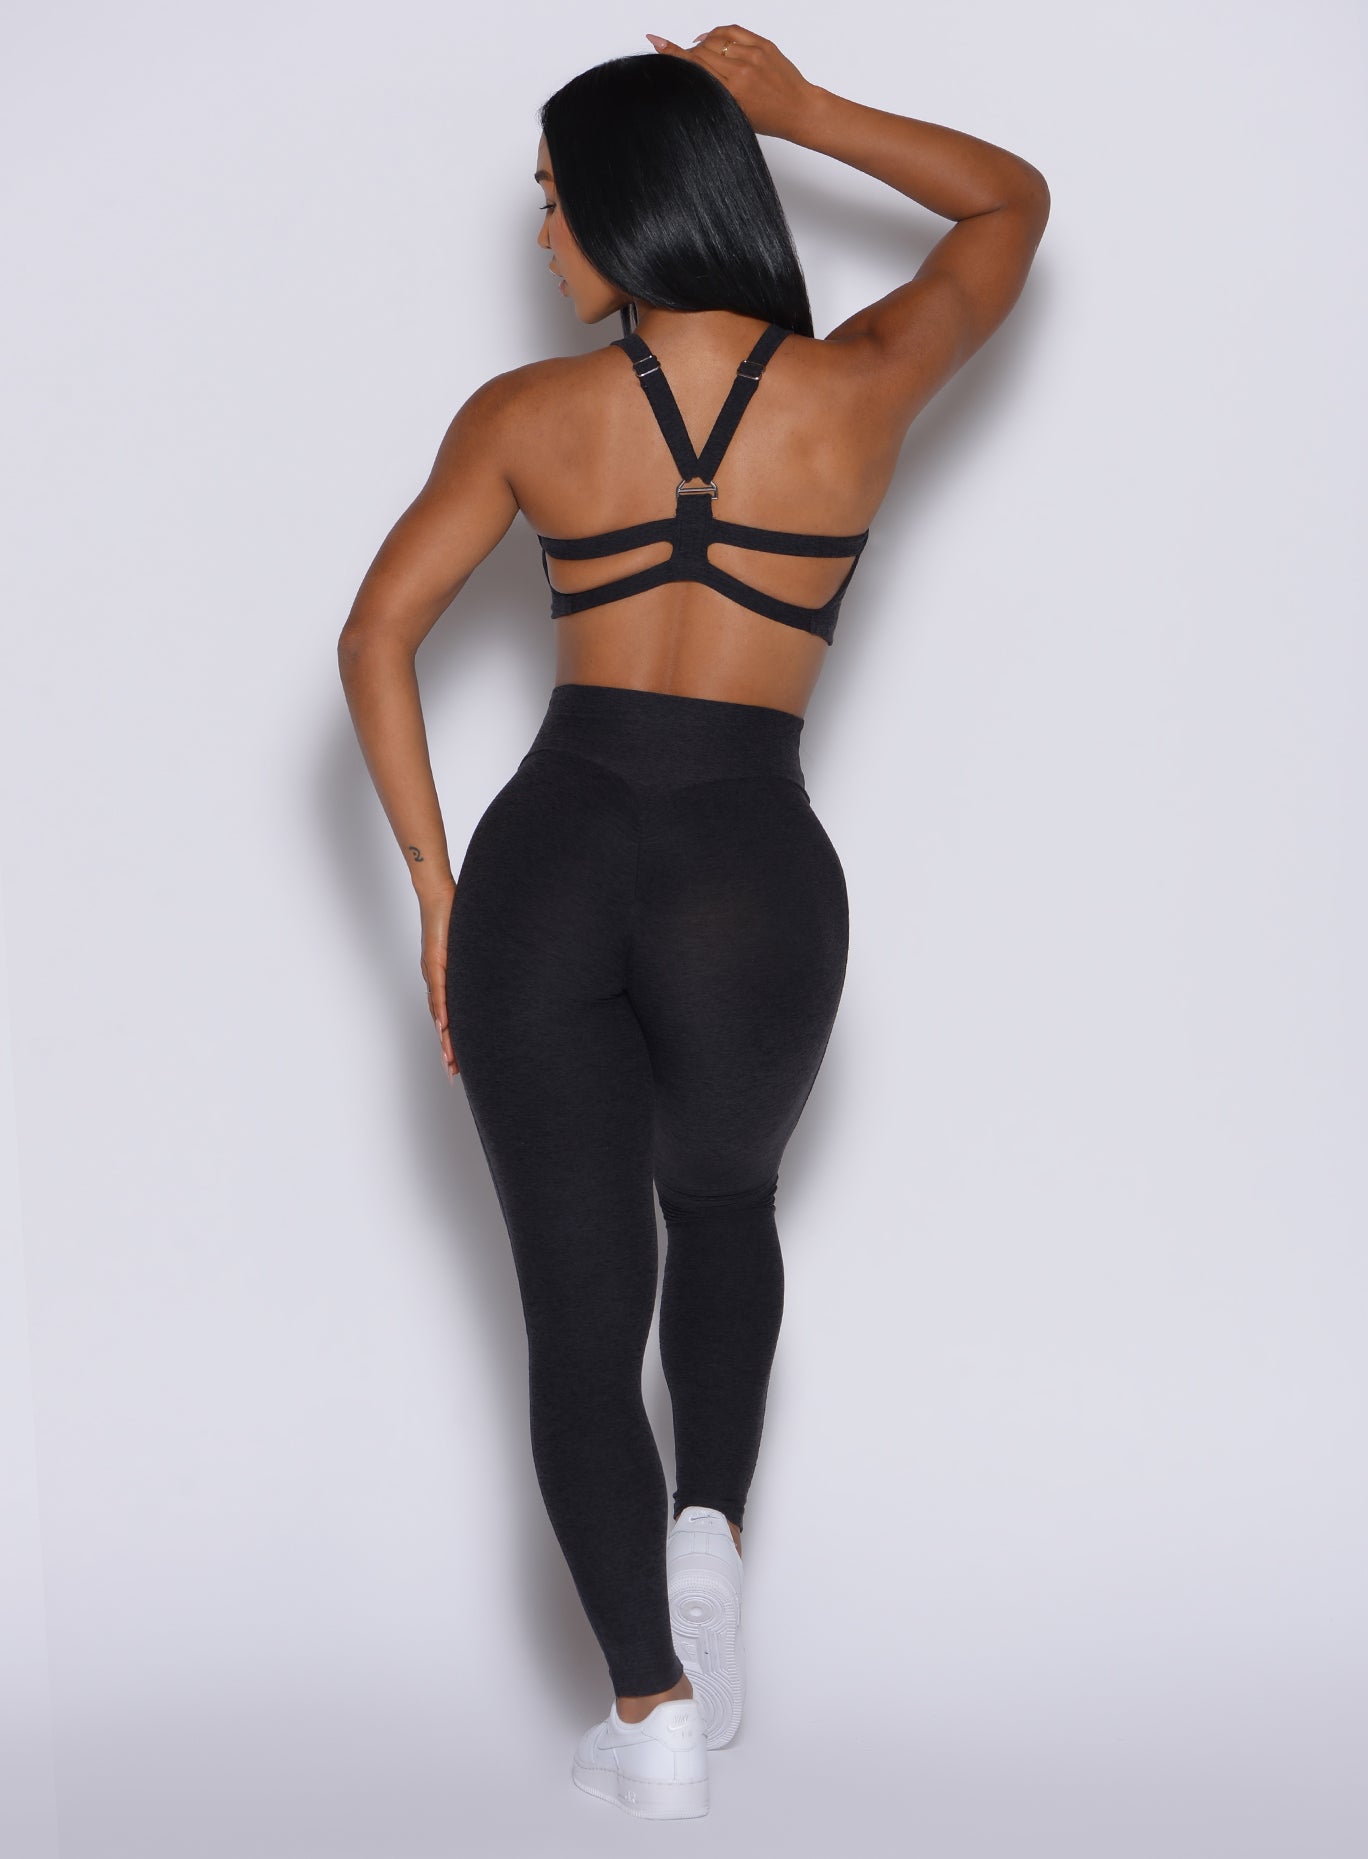 back profile of model wearing the Movement Leggings in black Onyx color and a matching sports bra